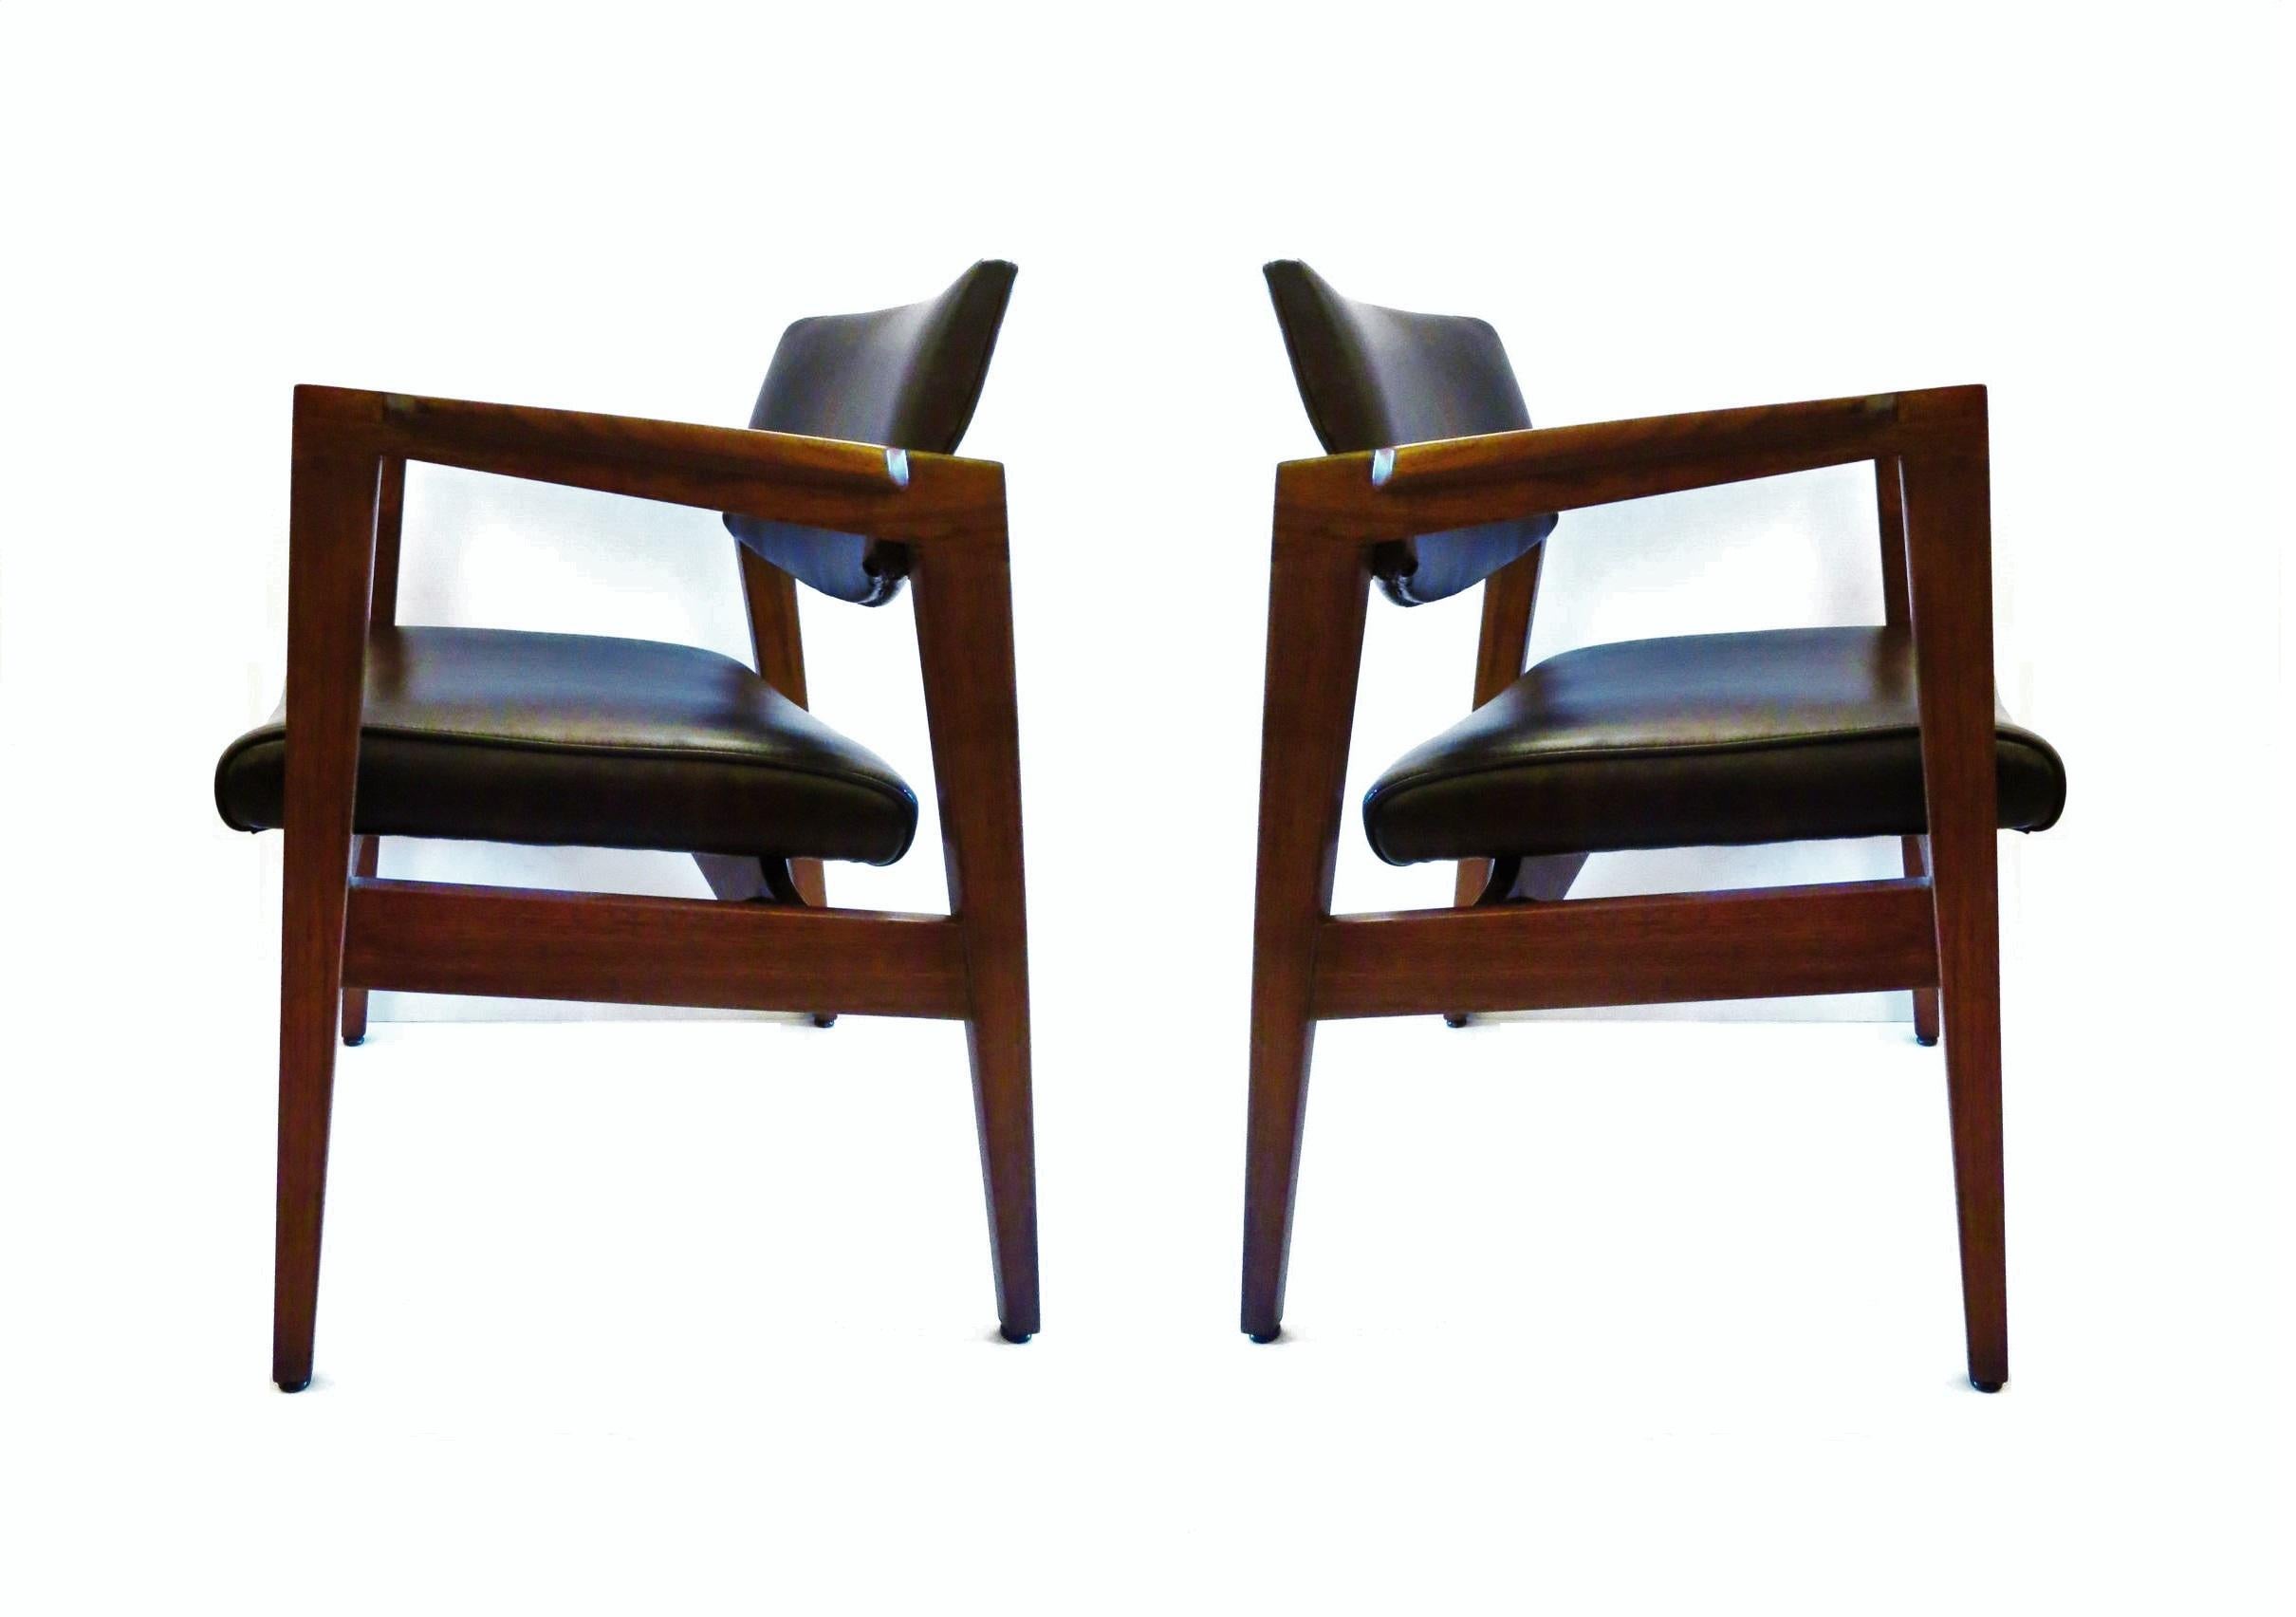 Set of four armchairs by Gunlocke Chair Co of Wayland, NY. With fantastic sculpted walnut wood frames, quality construction you come to expect with Gunlocke furniture. Chairs retain their original upholstery. They have it all, style strength and